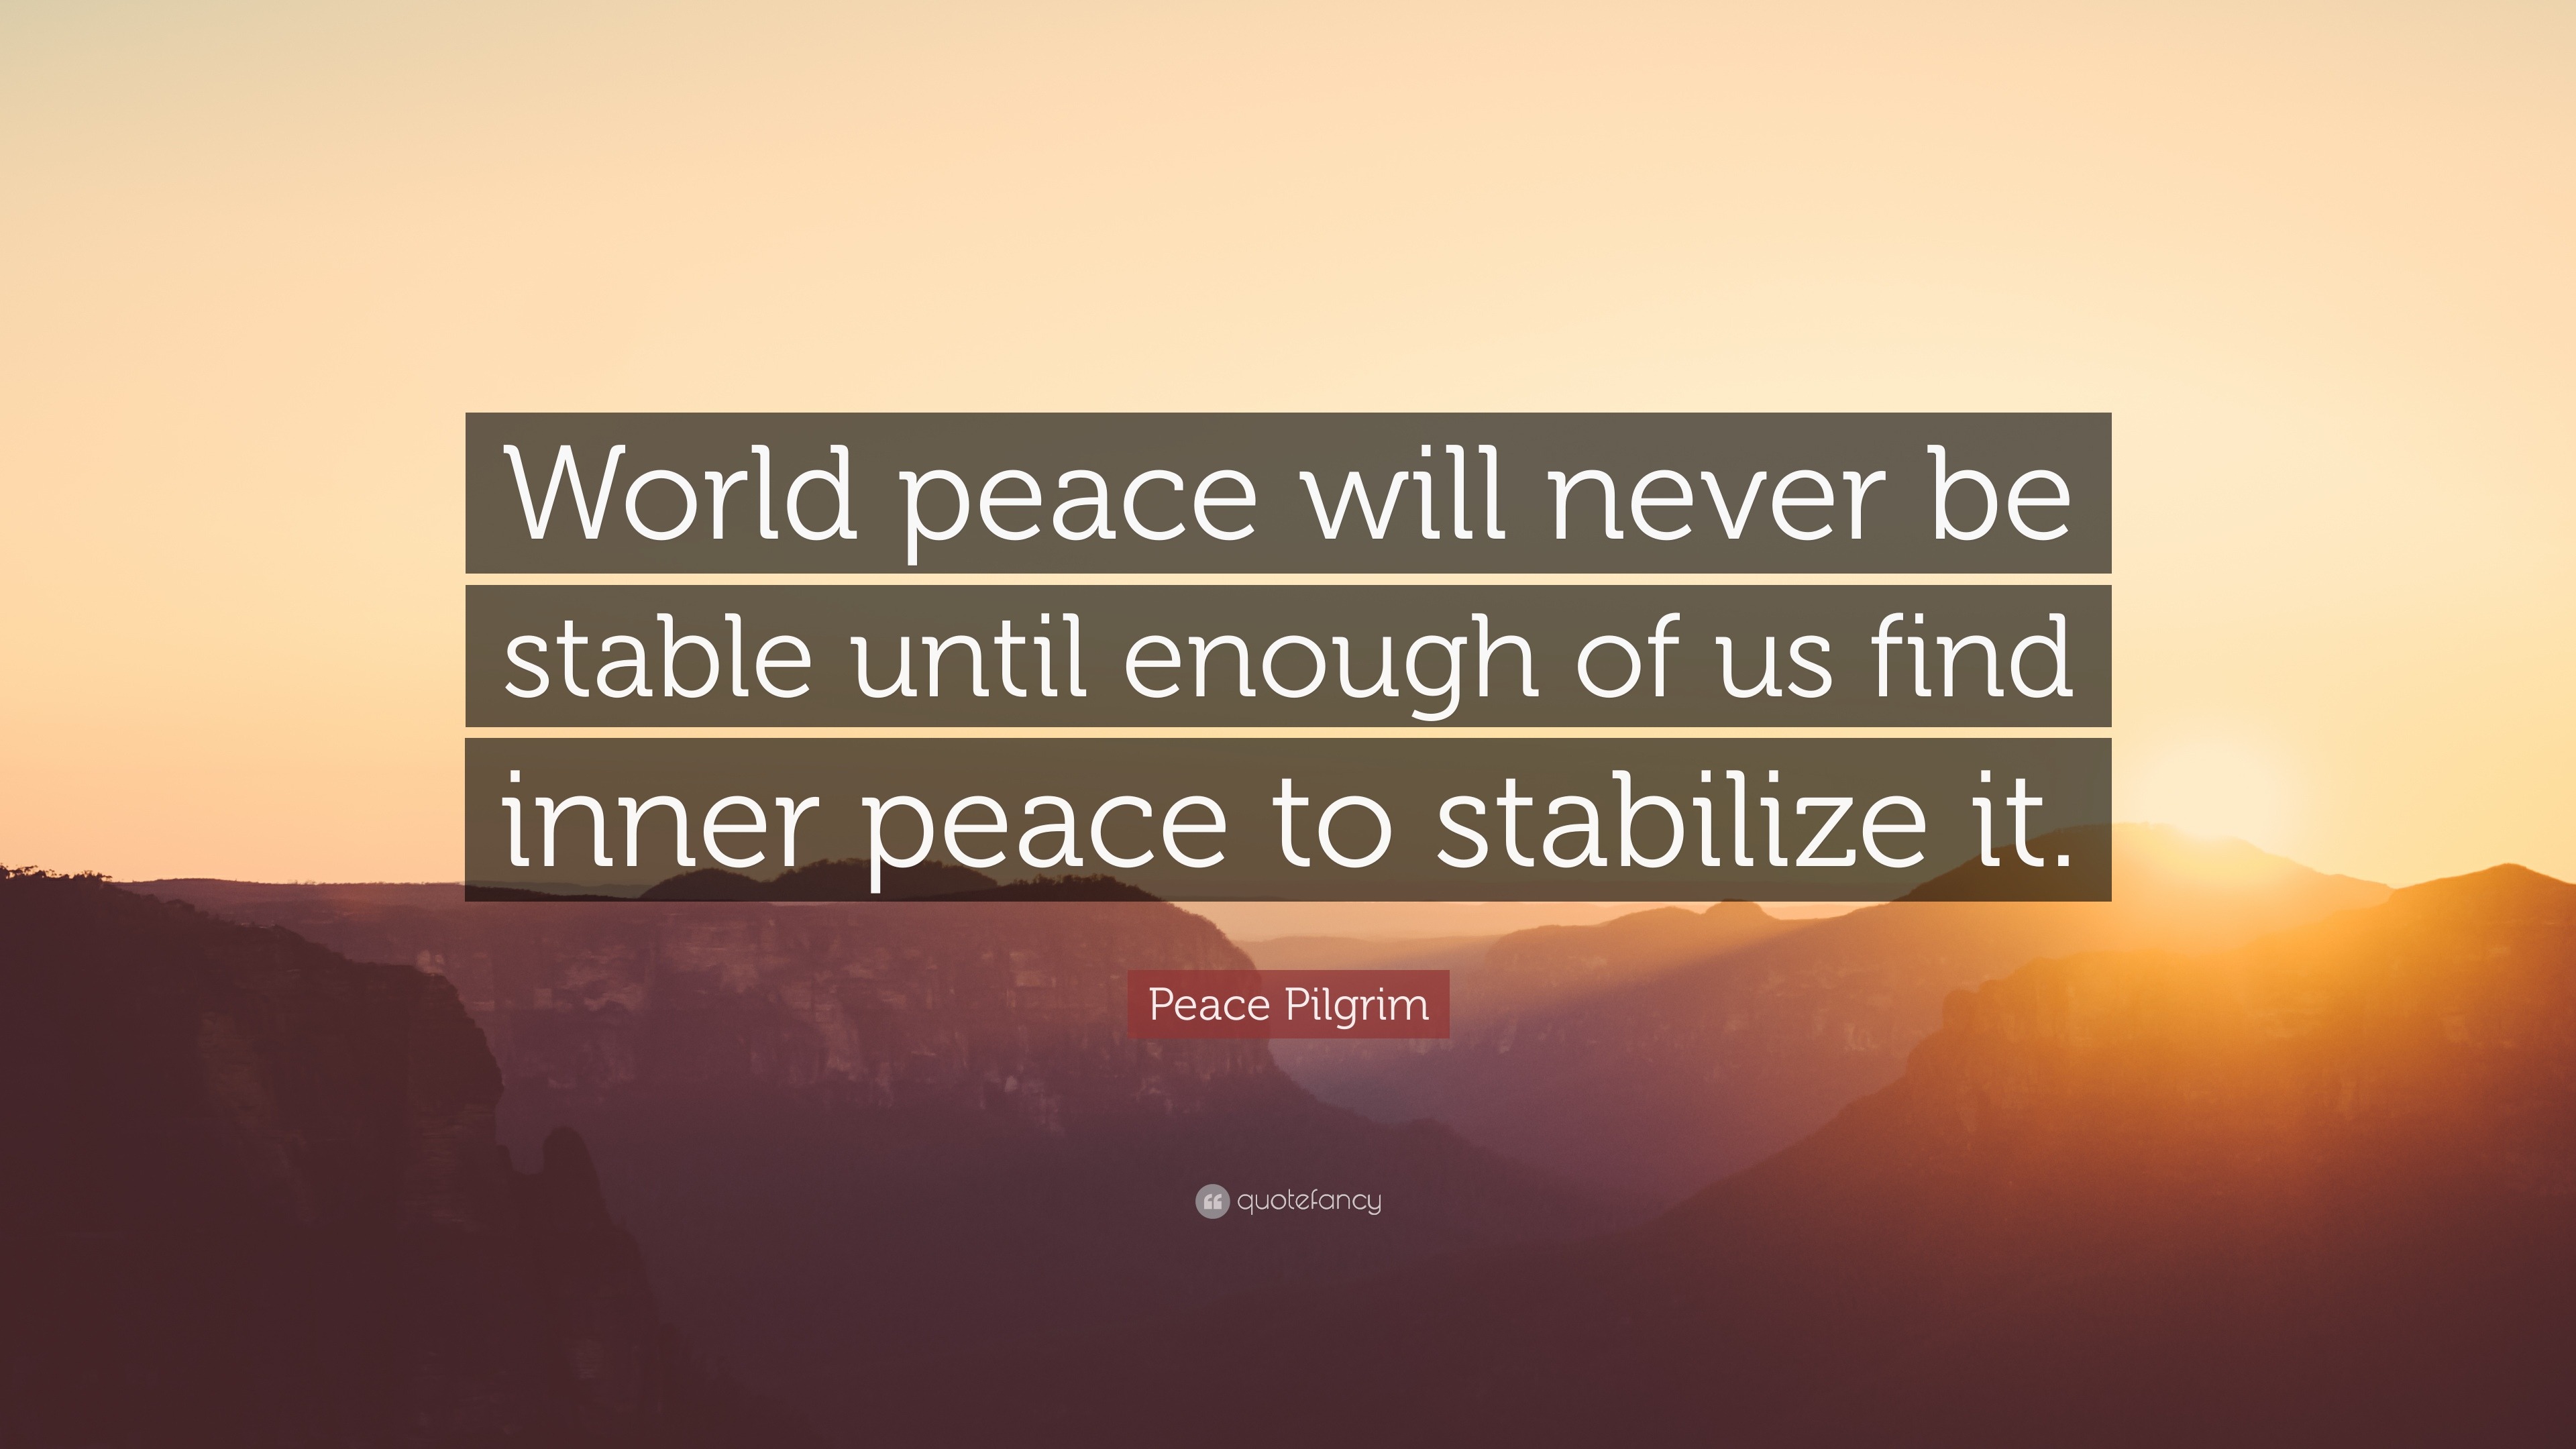 Peace Pilgrim Quote: “World peace will never be stable until enough of ...